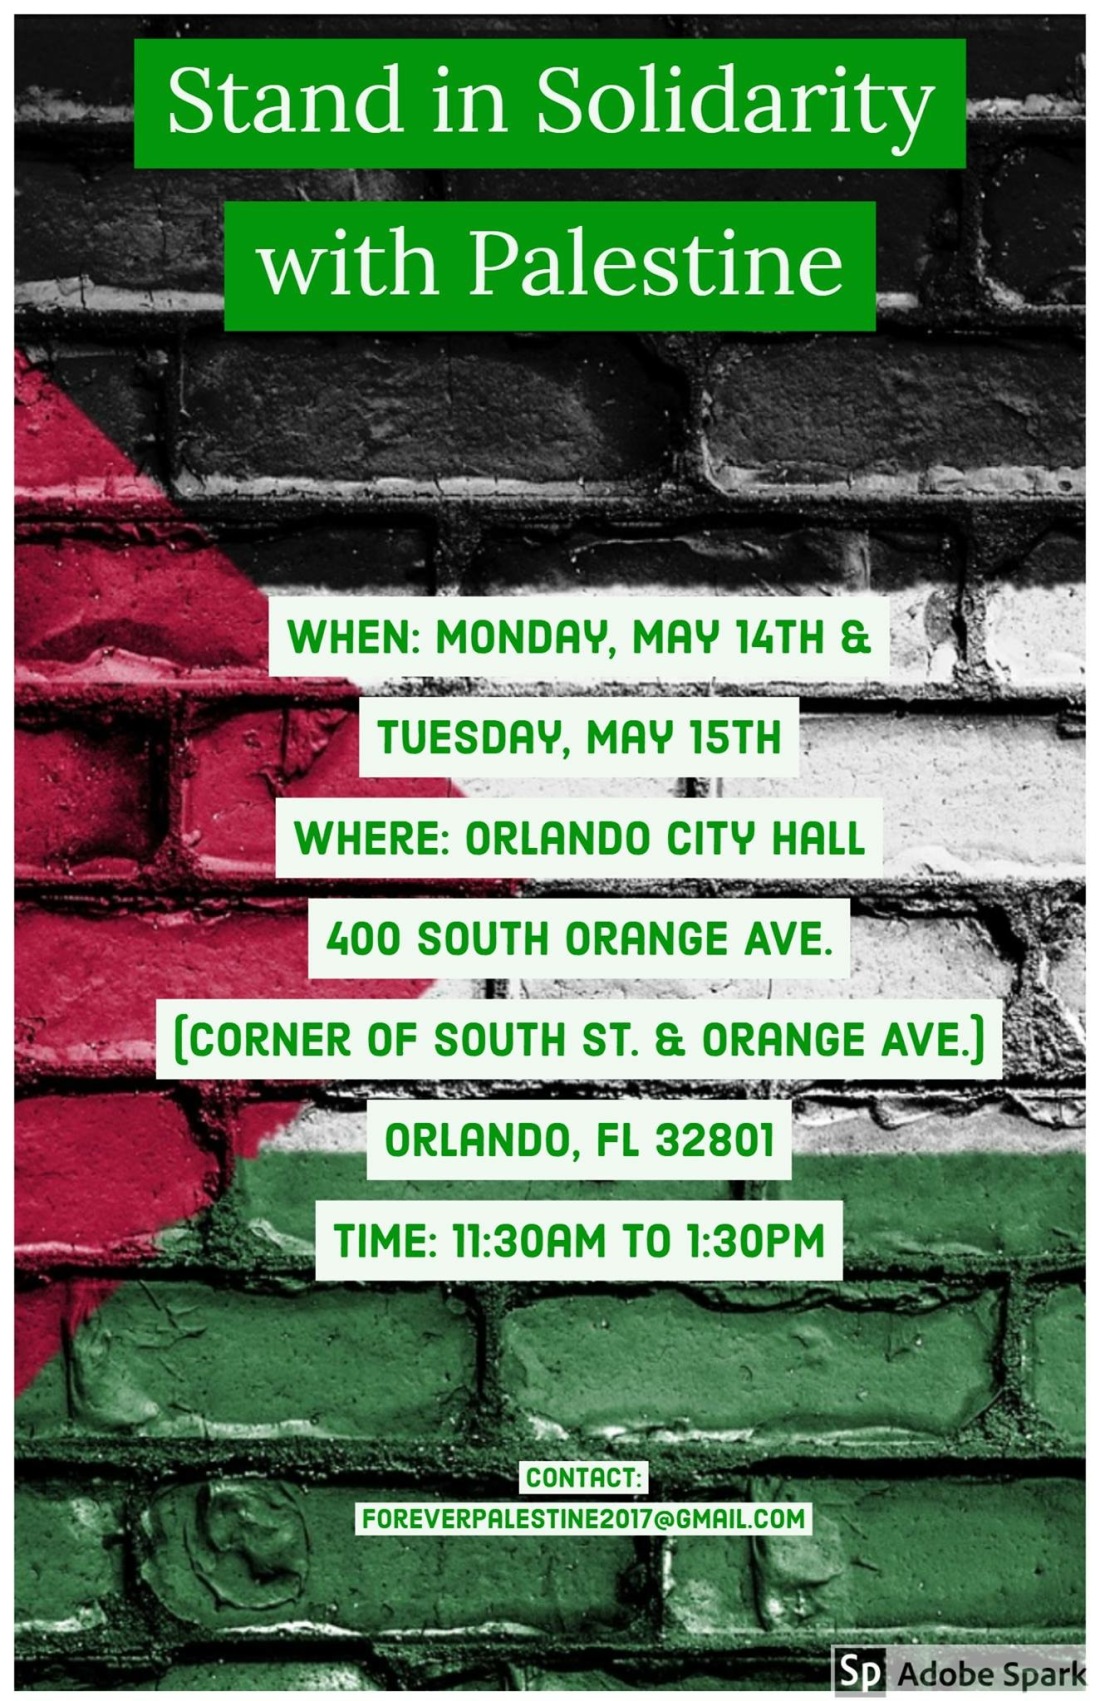 Flyer - Stand in Solidarity with Palestine - Rally